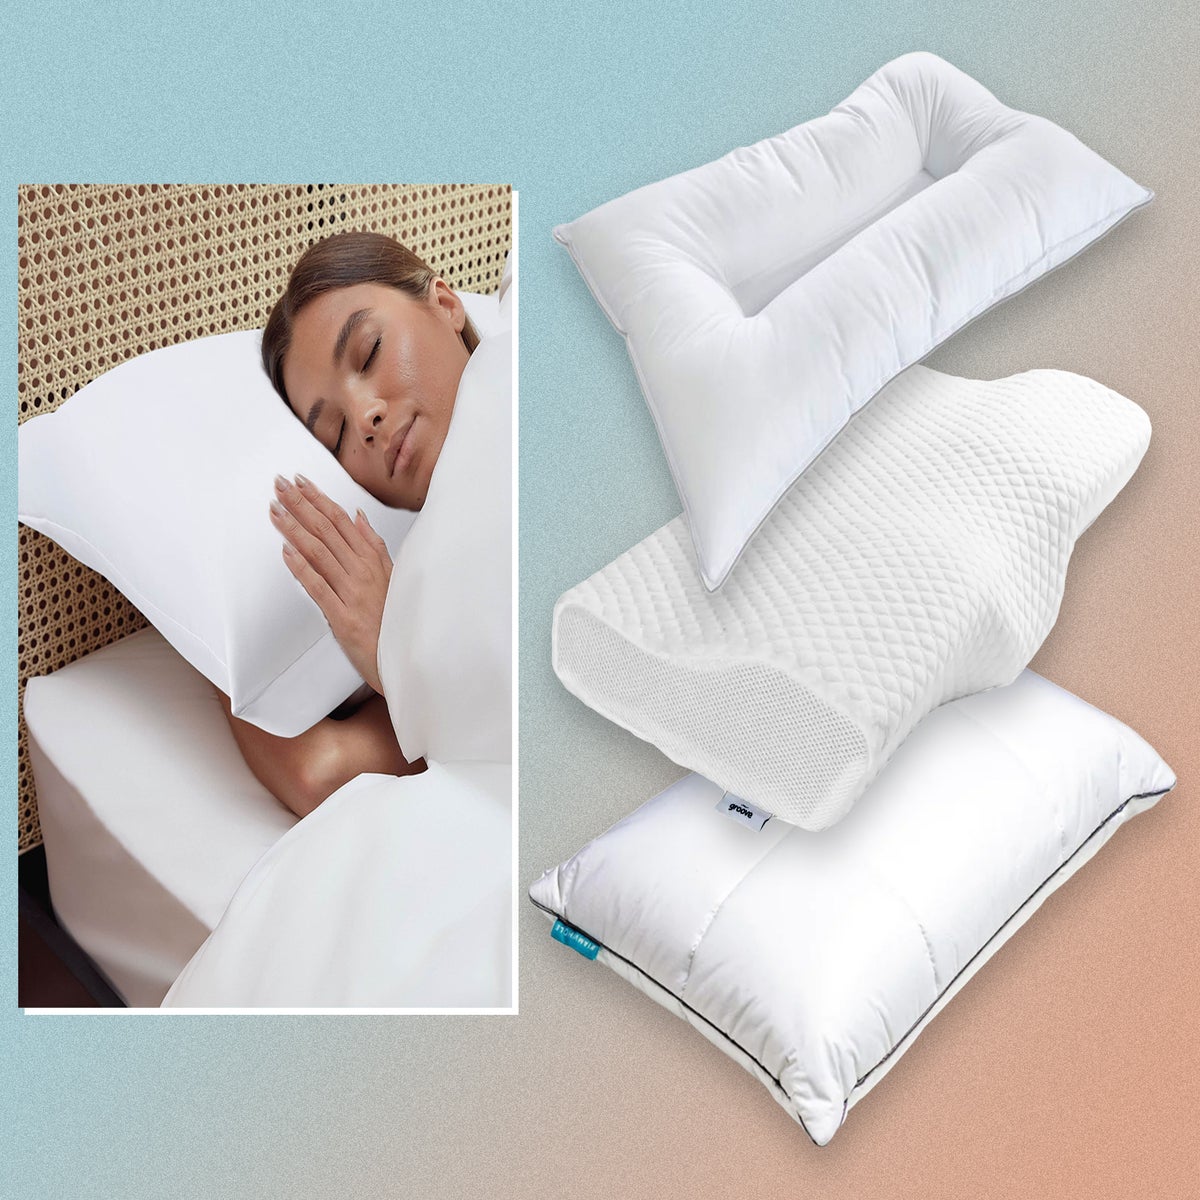 https://static.independent.co.uk/2023/05/04/15/anti%20snore%20pillows%20indybest.jpg?width=1200&height=1200&fit=crop